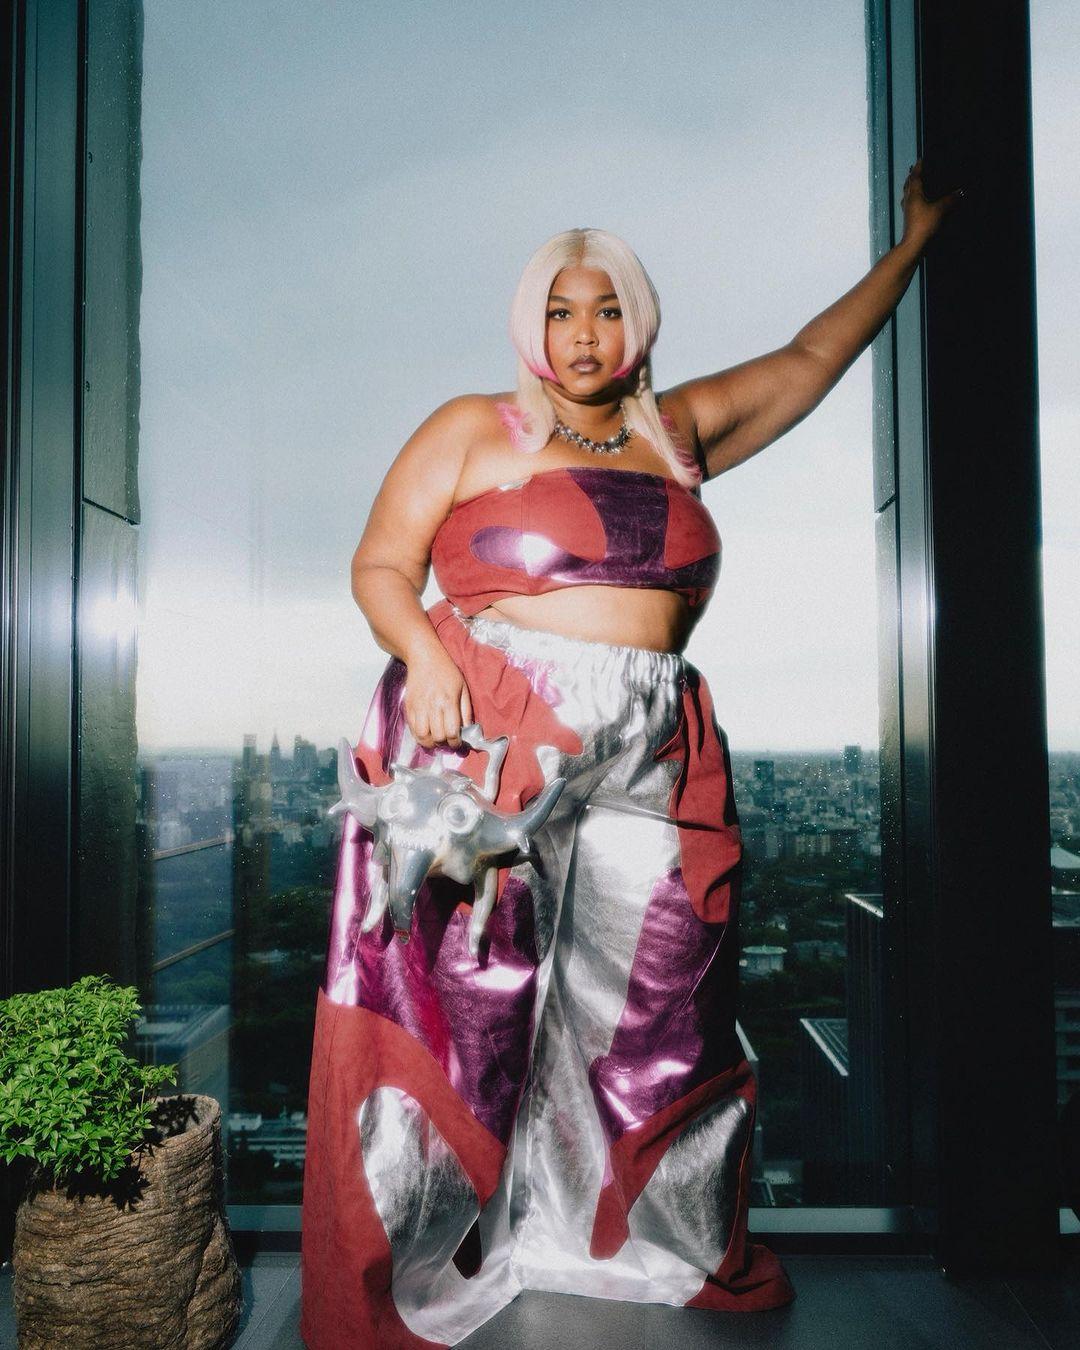 Lizzo reps her shapewear brand in Yitty outfit beneath glossy pink